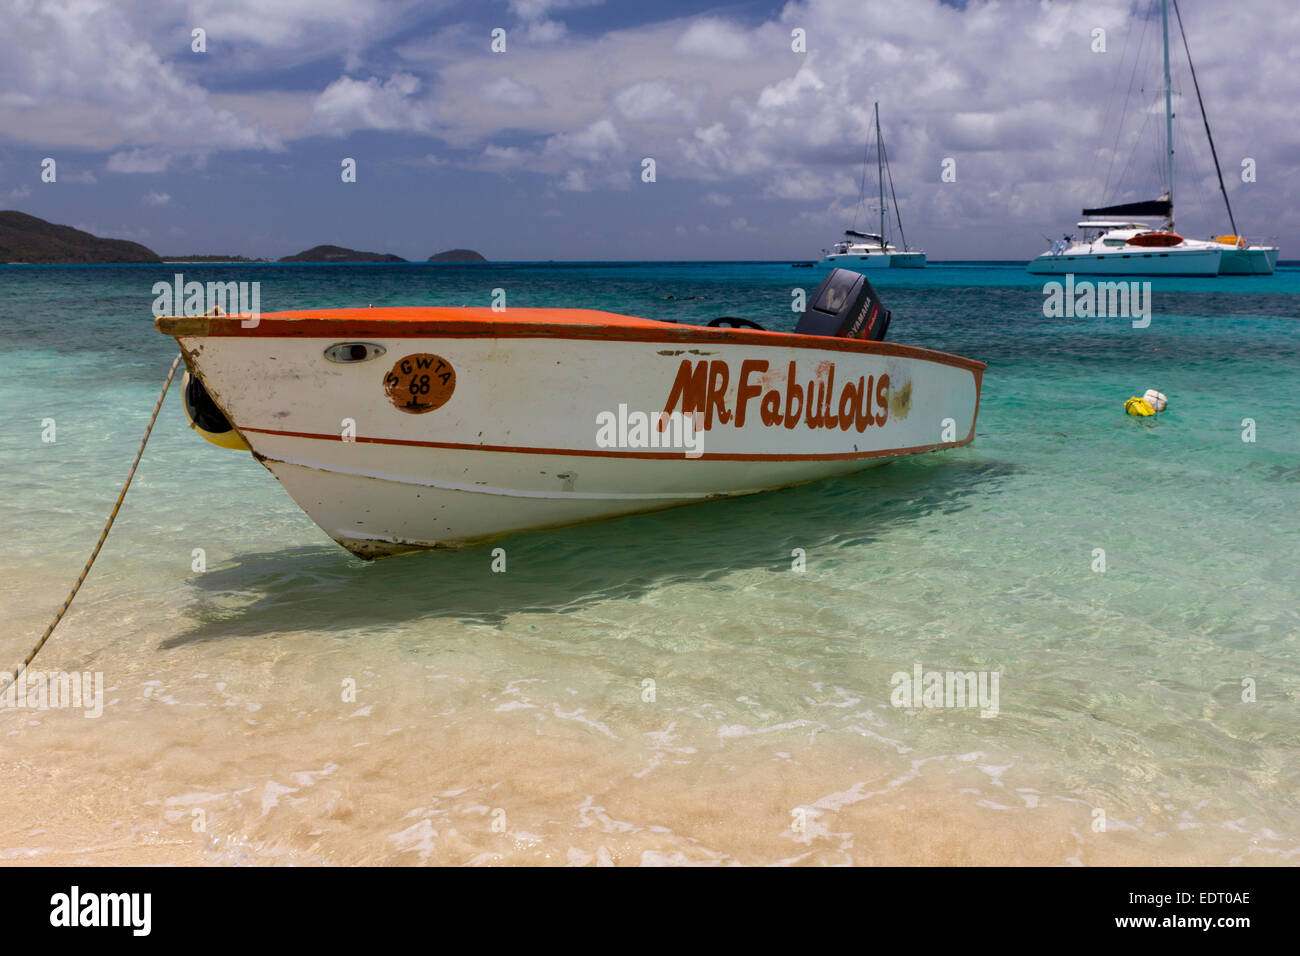 ‘Mr. Fabulous’; Water Taxi Moored off a Tranquil Beach on a Turquoise Caribbean Sea at Petit Bateau, Tobago Cays, Grenadines. Stock Photo